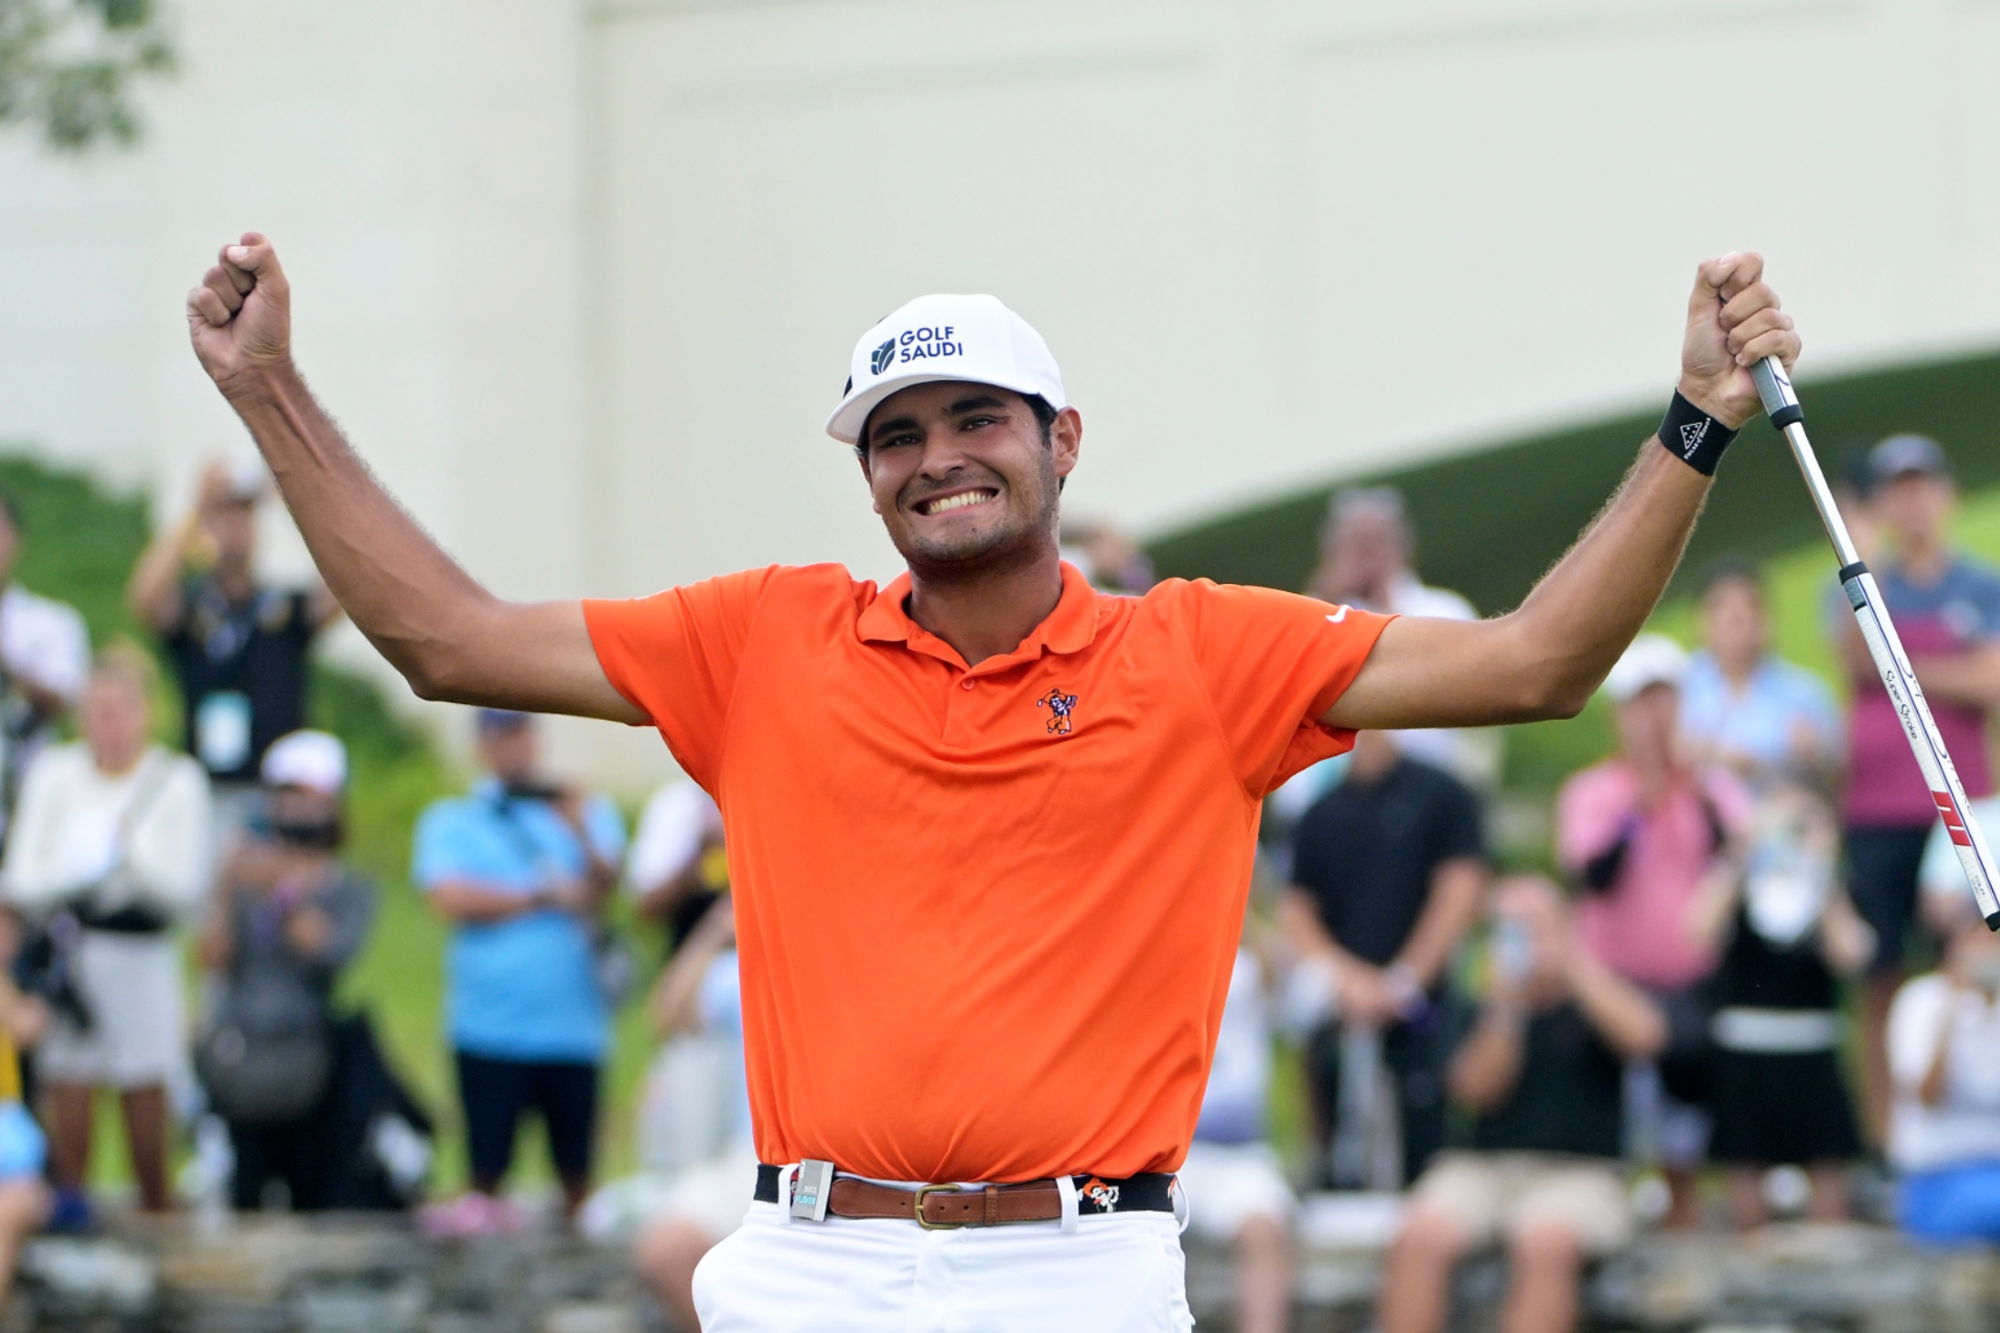 Eugenio Chacarra From college dropout to multi-millionaire after emphatic LIV Golf victory